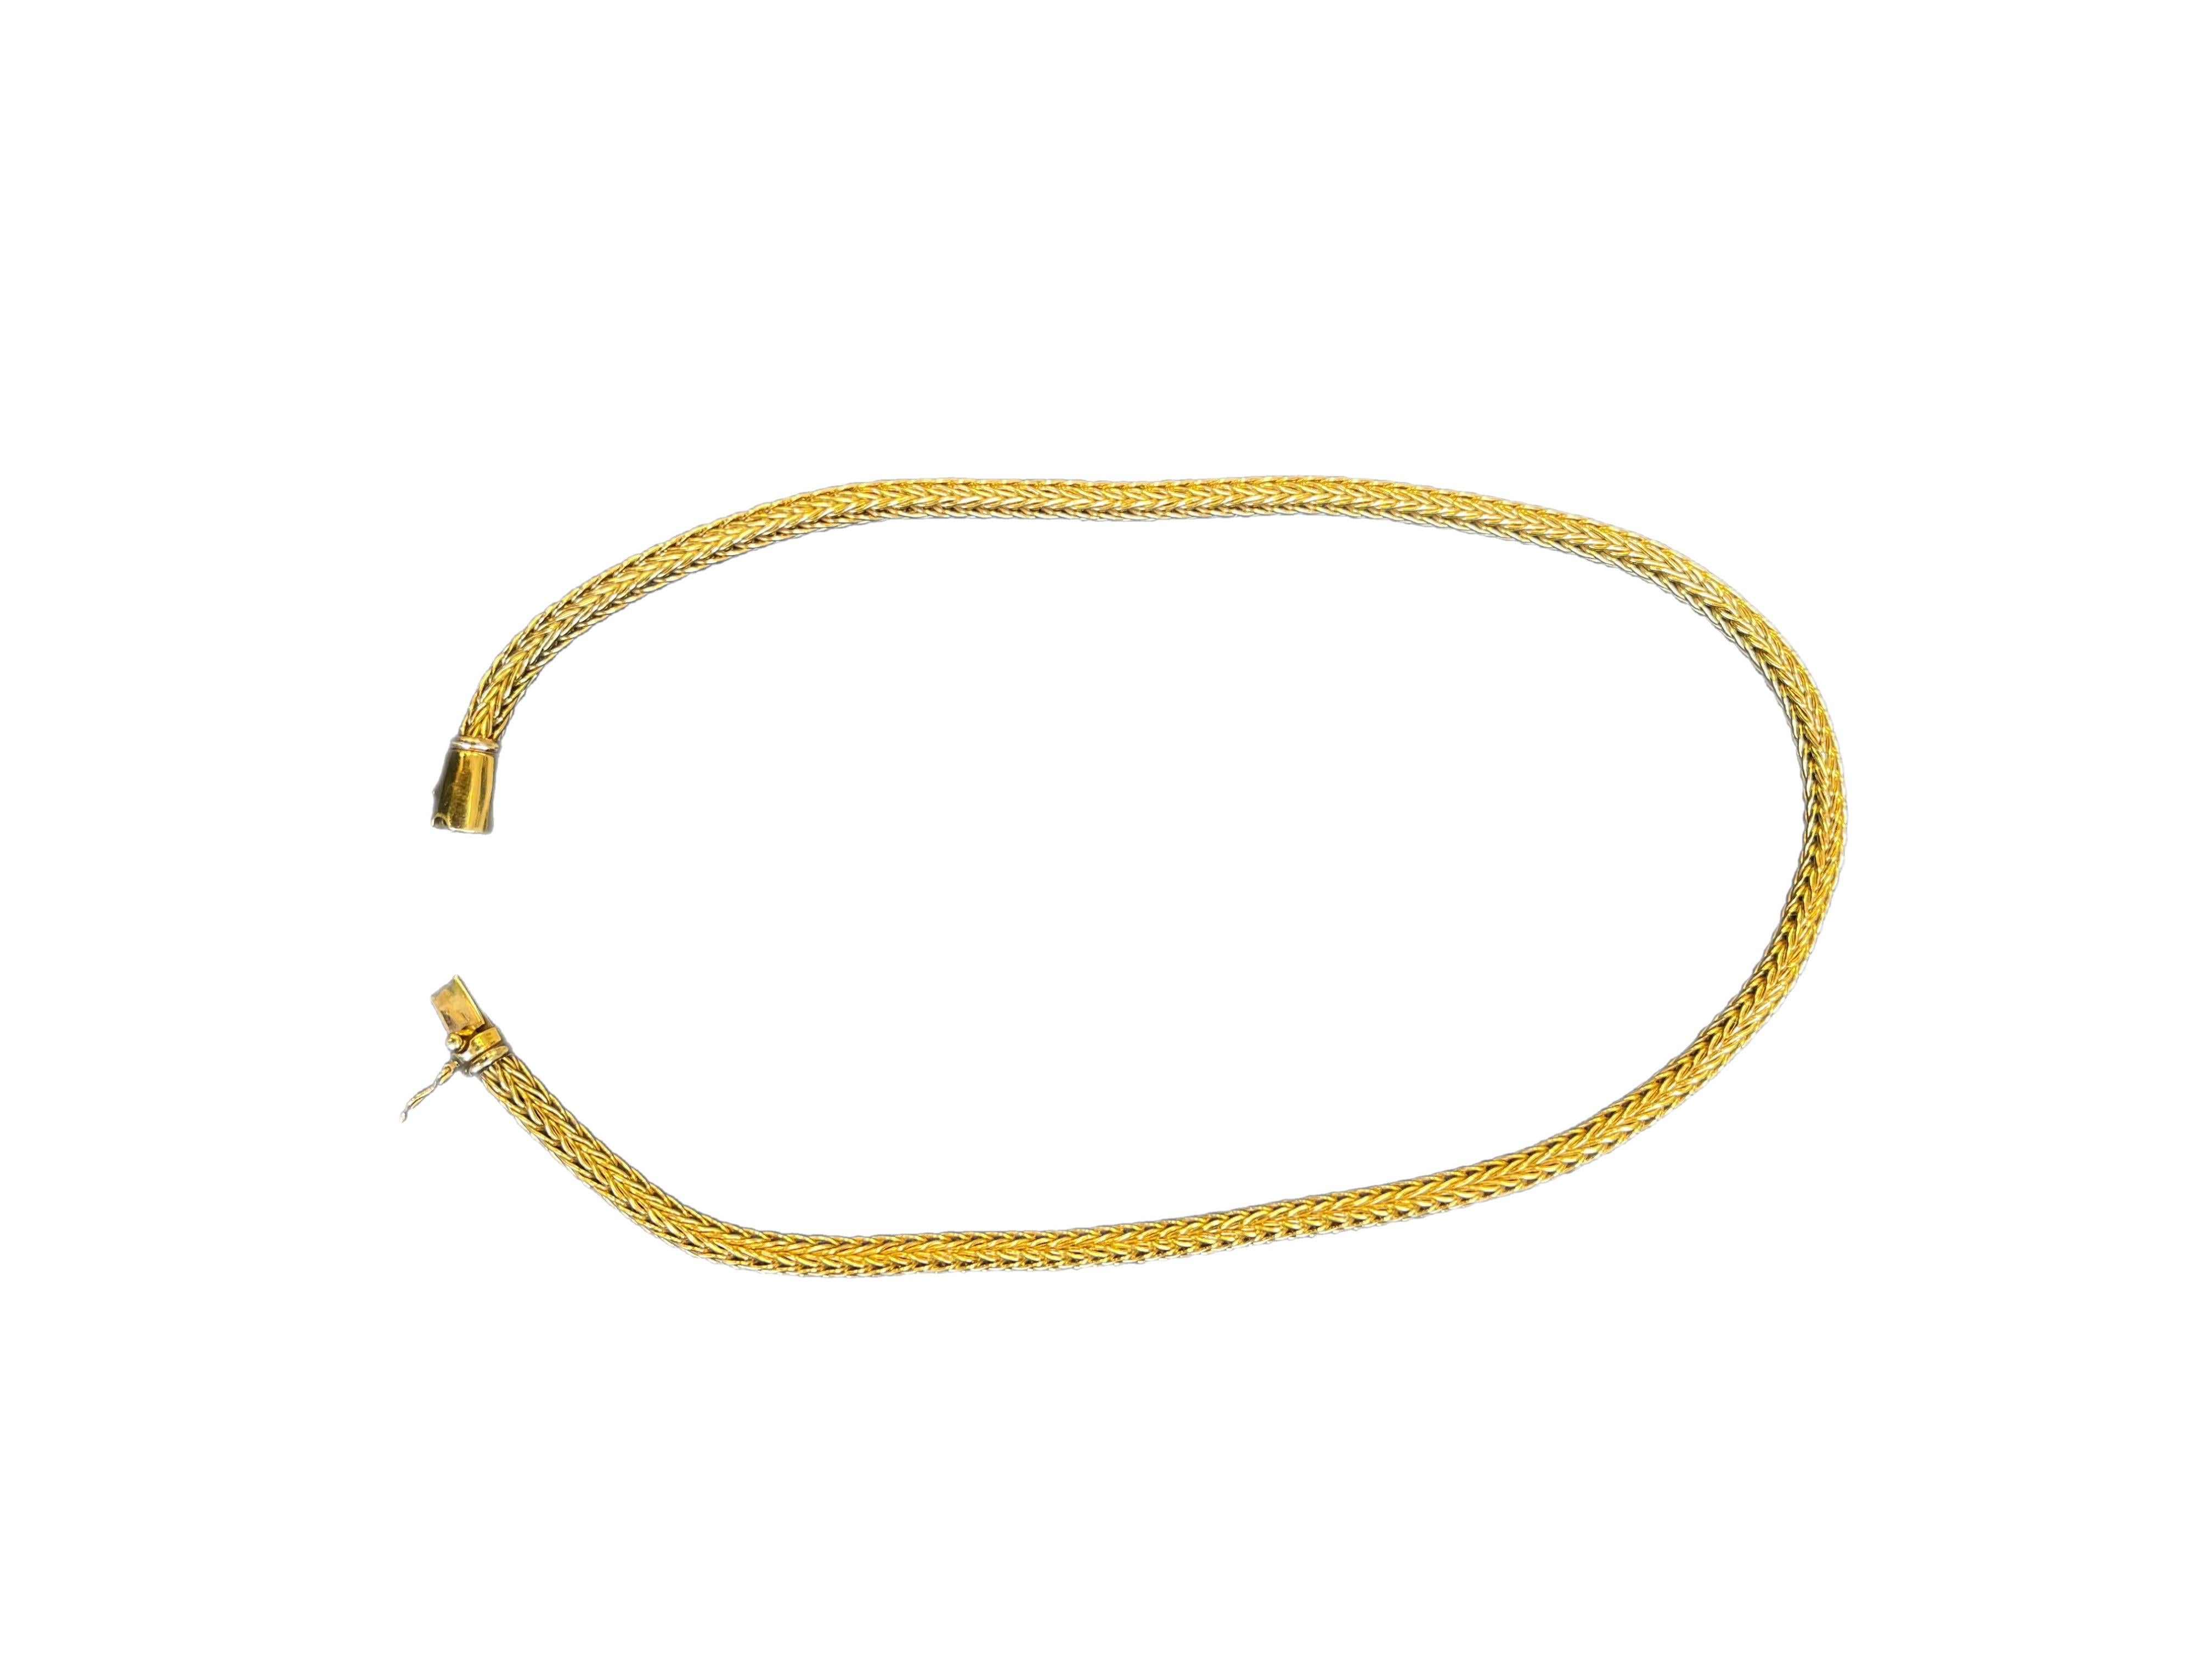 Marvelous workmanship, is showcased in this handmade Italian 18 karat yellow gold foxtail style woven necklace. Weighing an impressive 75 Grams of gold with a 6 mm thickness.
Finley crafted with a silky feel its as comfortable as it is pretty.


All